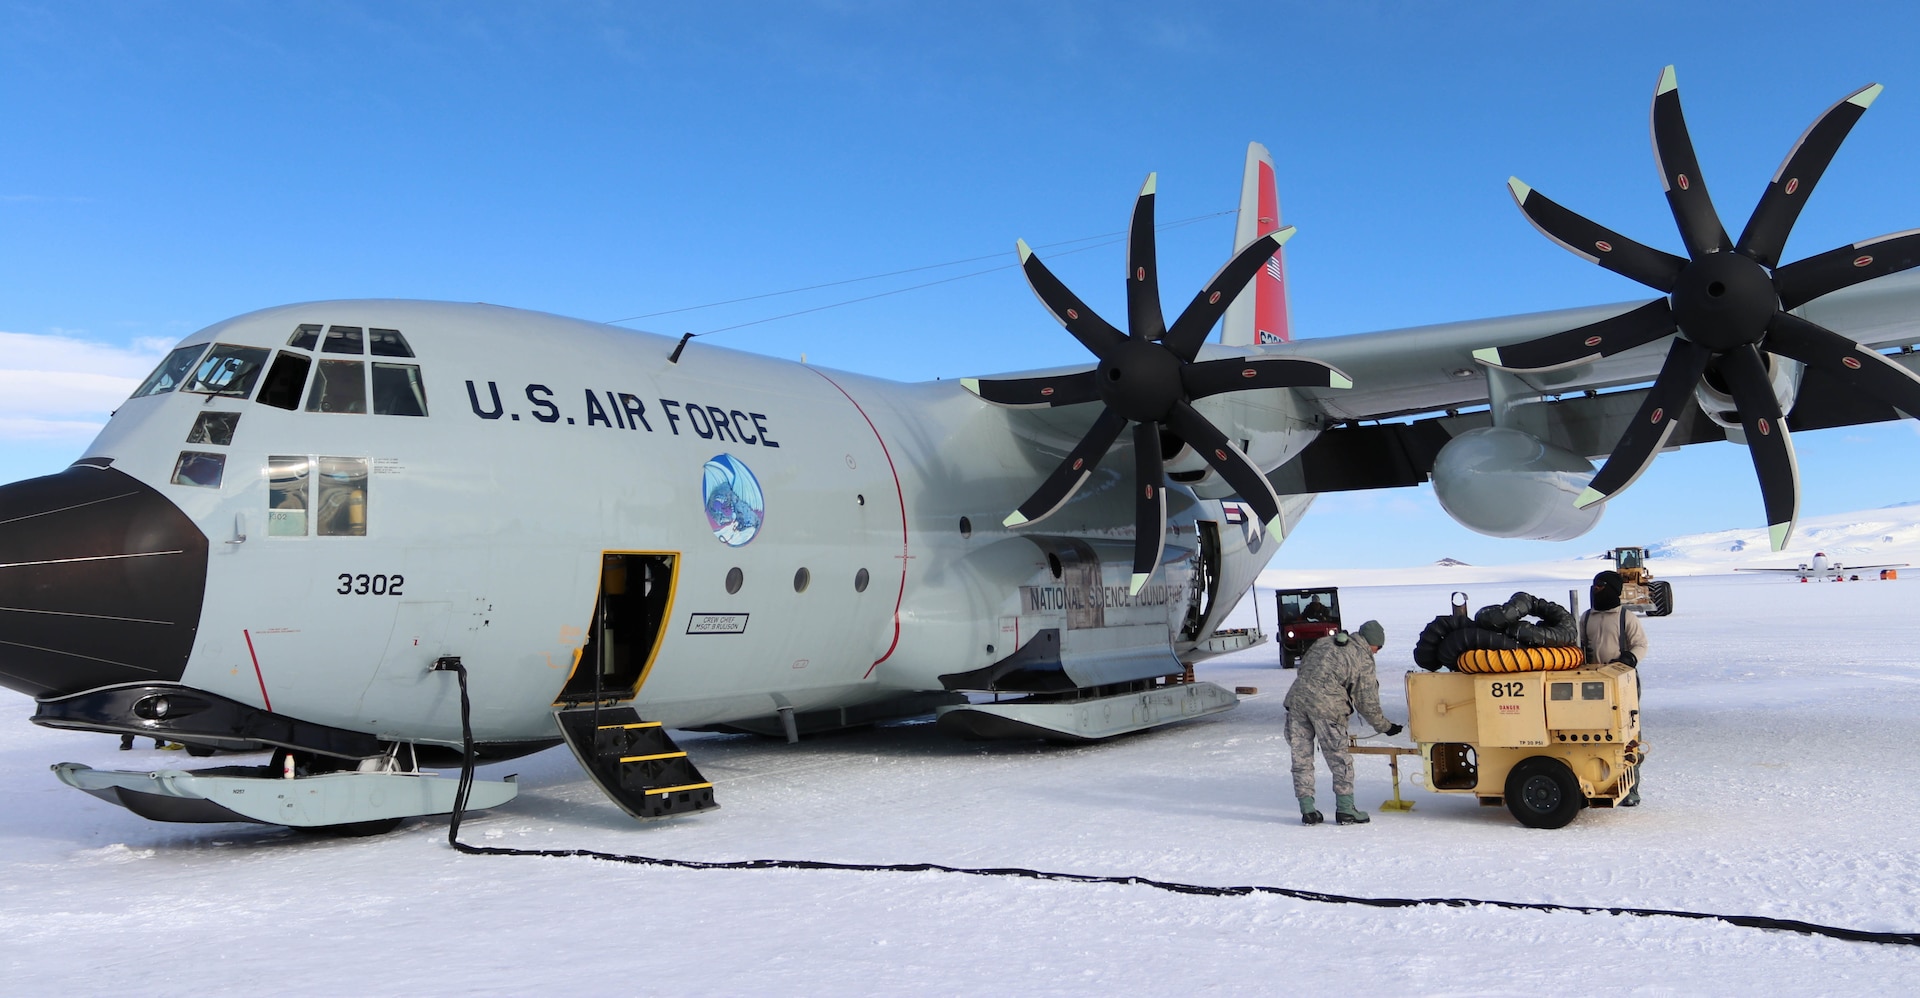 A member of the New York Air National Guard's 109th Airlift Wing performs maintenance on an LC-130, ski-equipped aircraft at McMurdo Station, Antarctica, on Dec. 17, 2018. The 109th normally provides logistics support to U.S. Antarctic research operations by flying people, equipment and supplies around the continent. Because of COVID-19, the wing will deploy aircraft to New Zealand this year where they will be on standby.